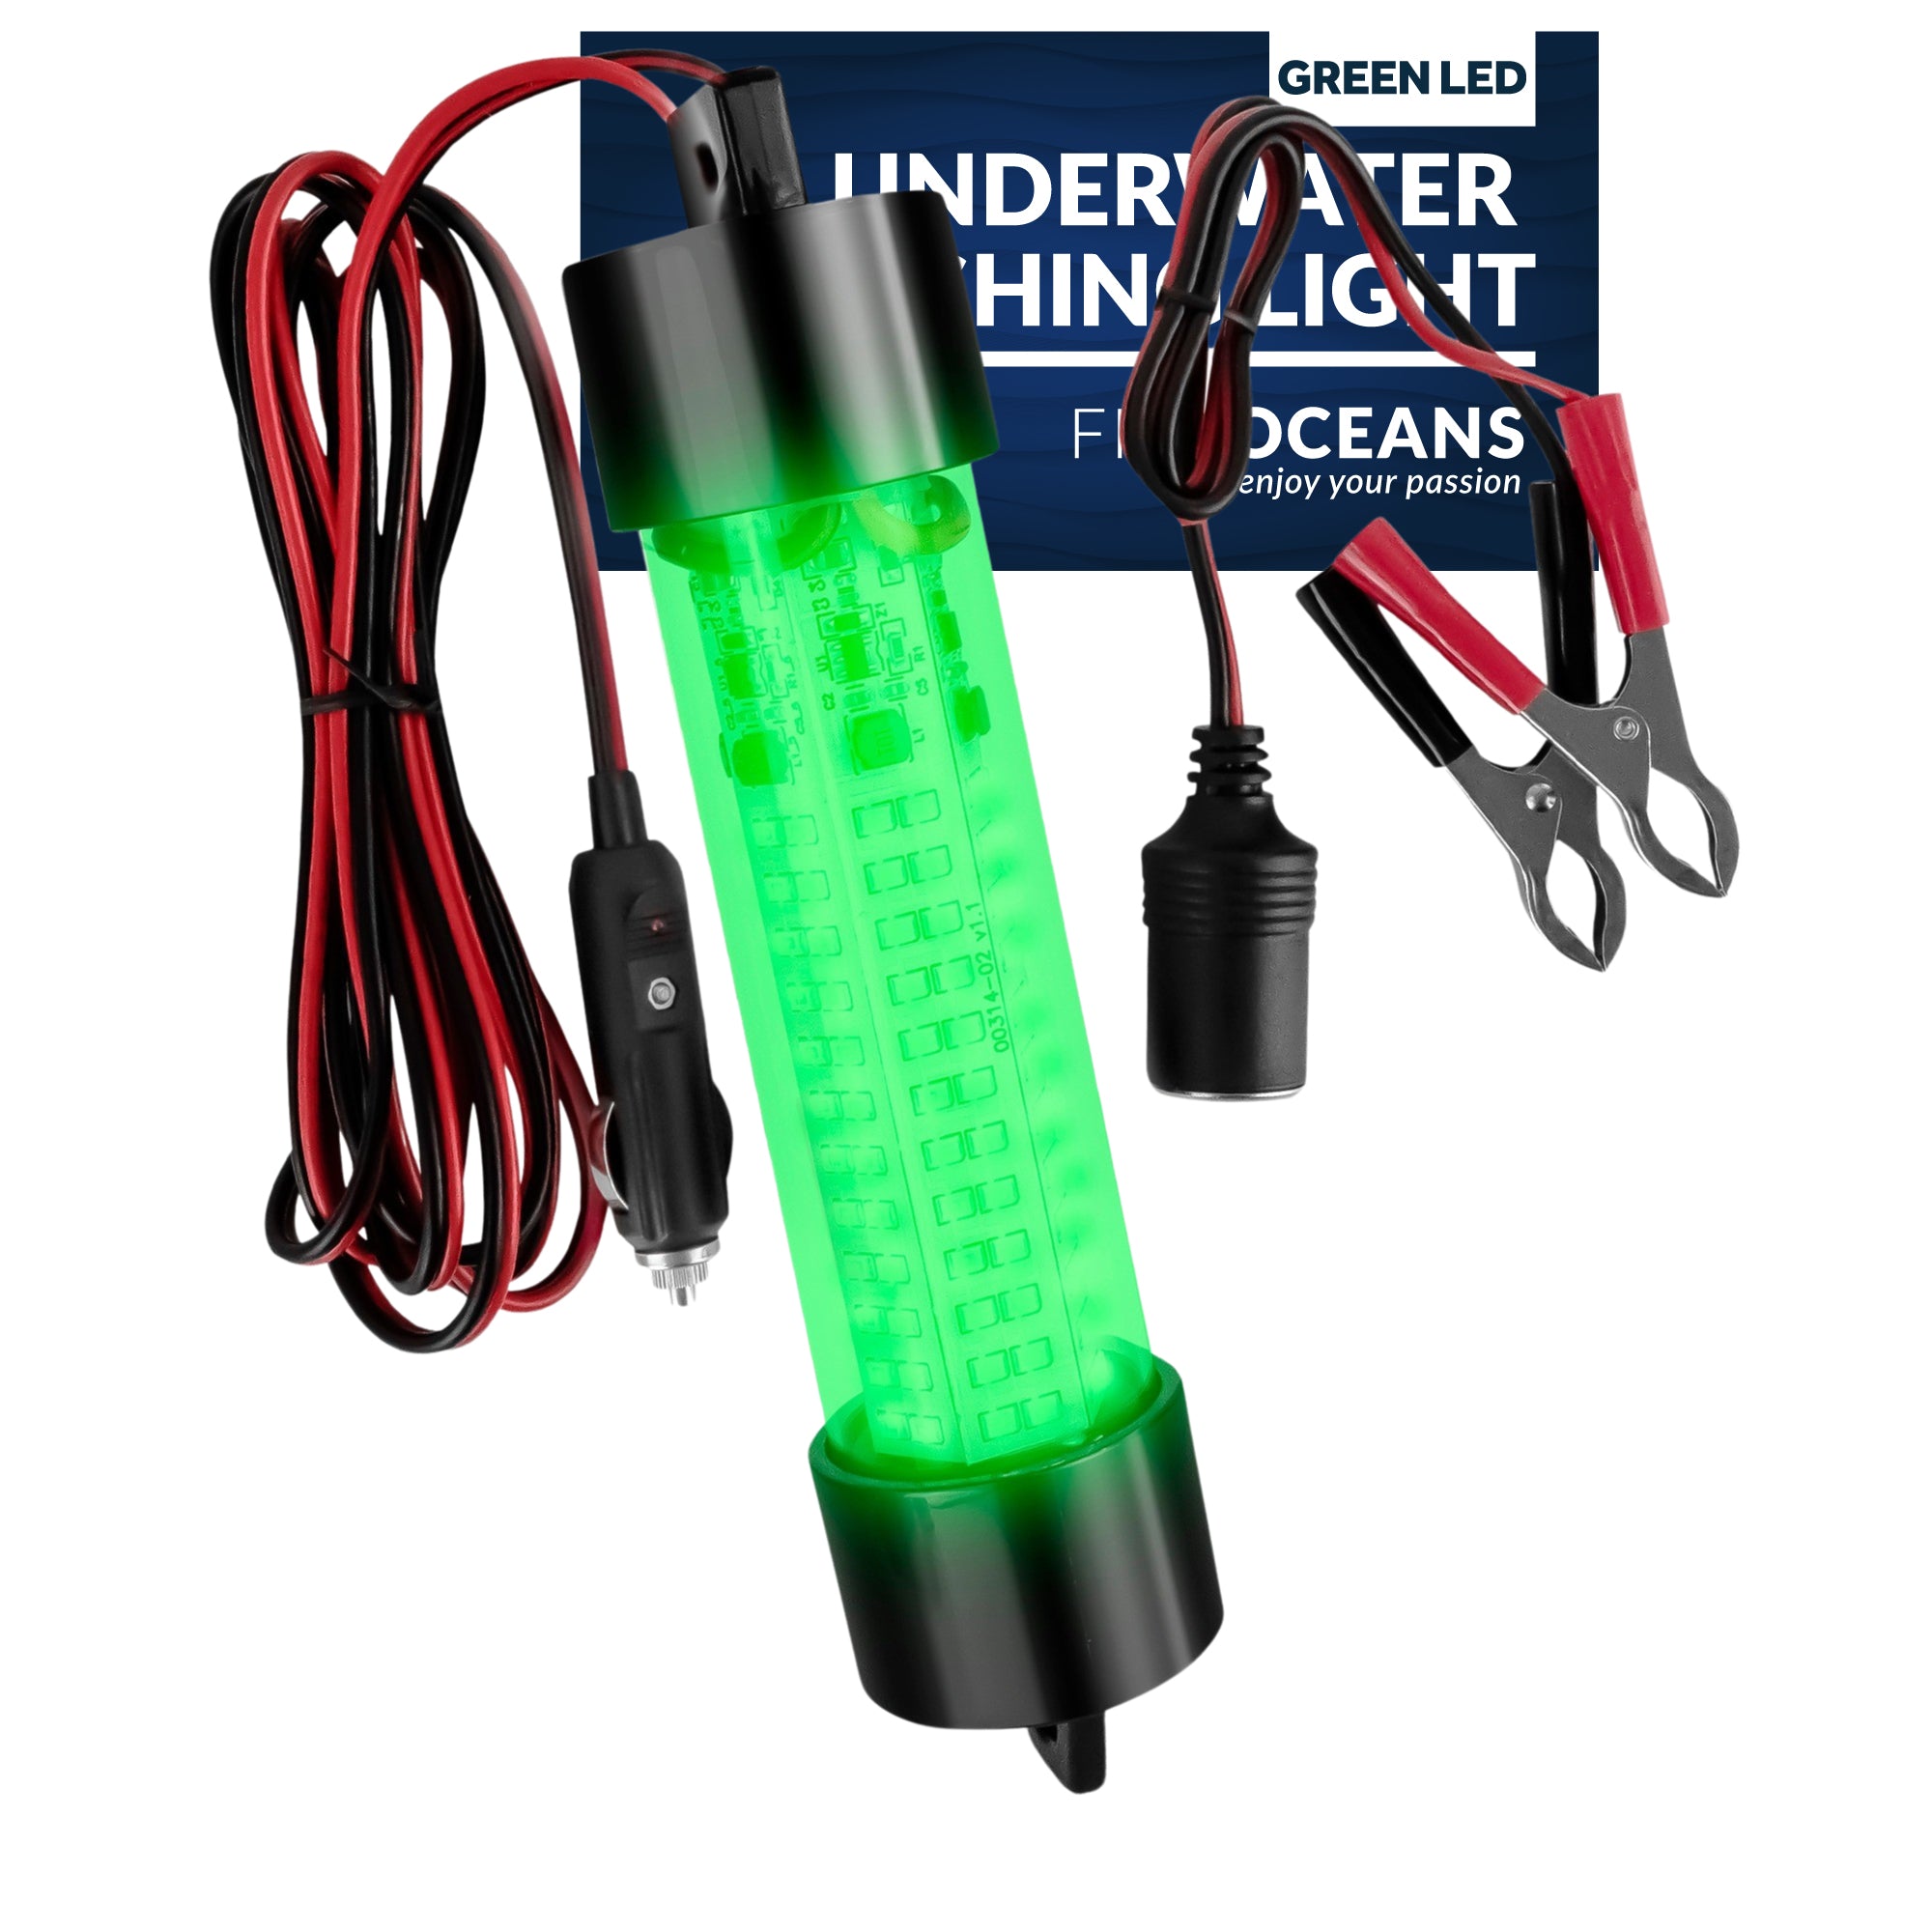 Five Oceans Fishing Light, Underwater Fishing Light, Green LED Submersible Night Fish Finder Lamp, with 17 Feet Power Cord, 144 LED's - 10-30 Volts